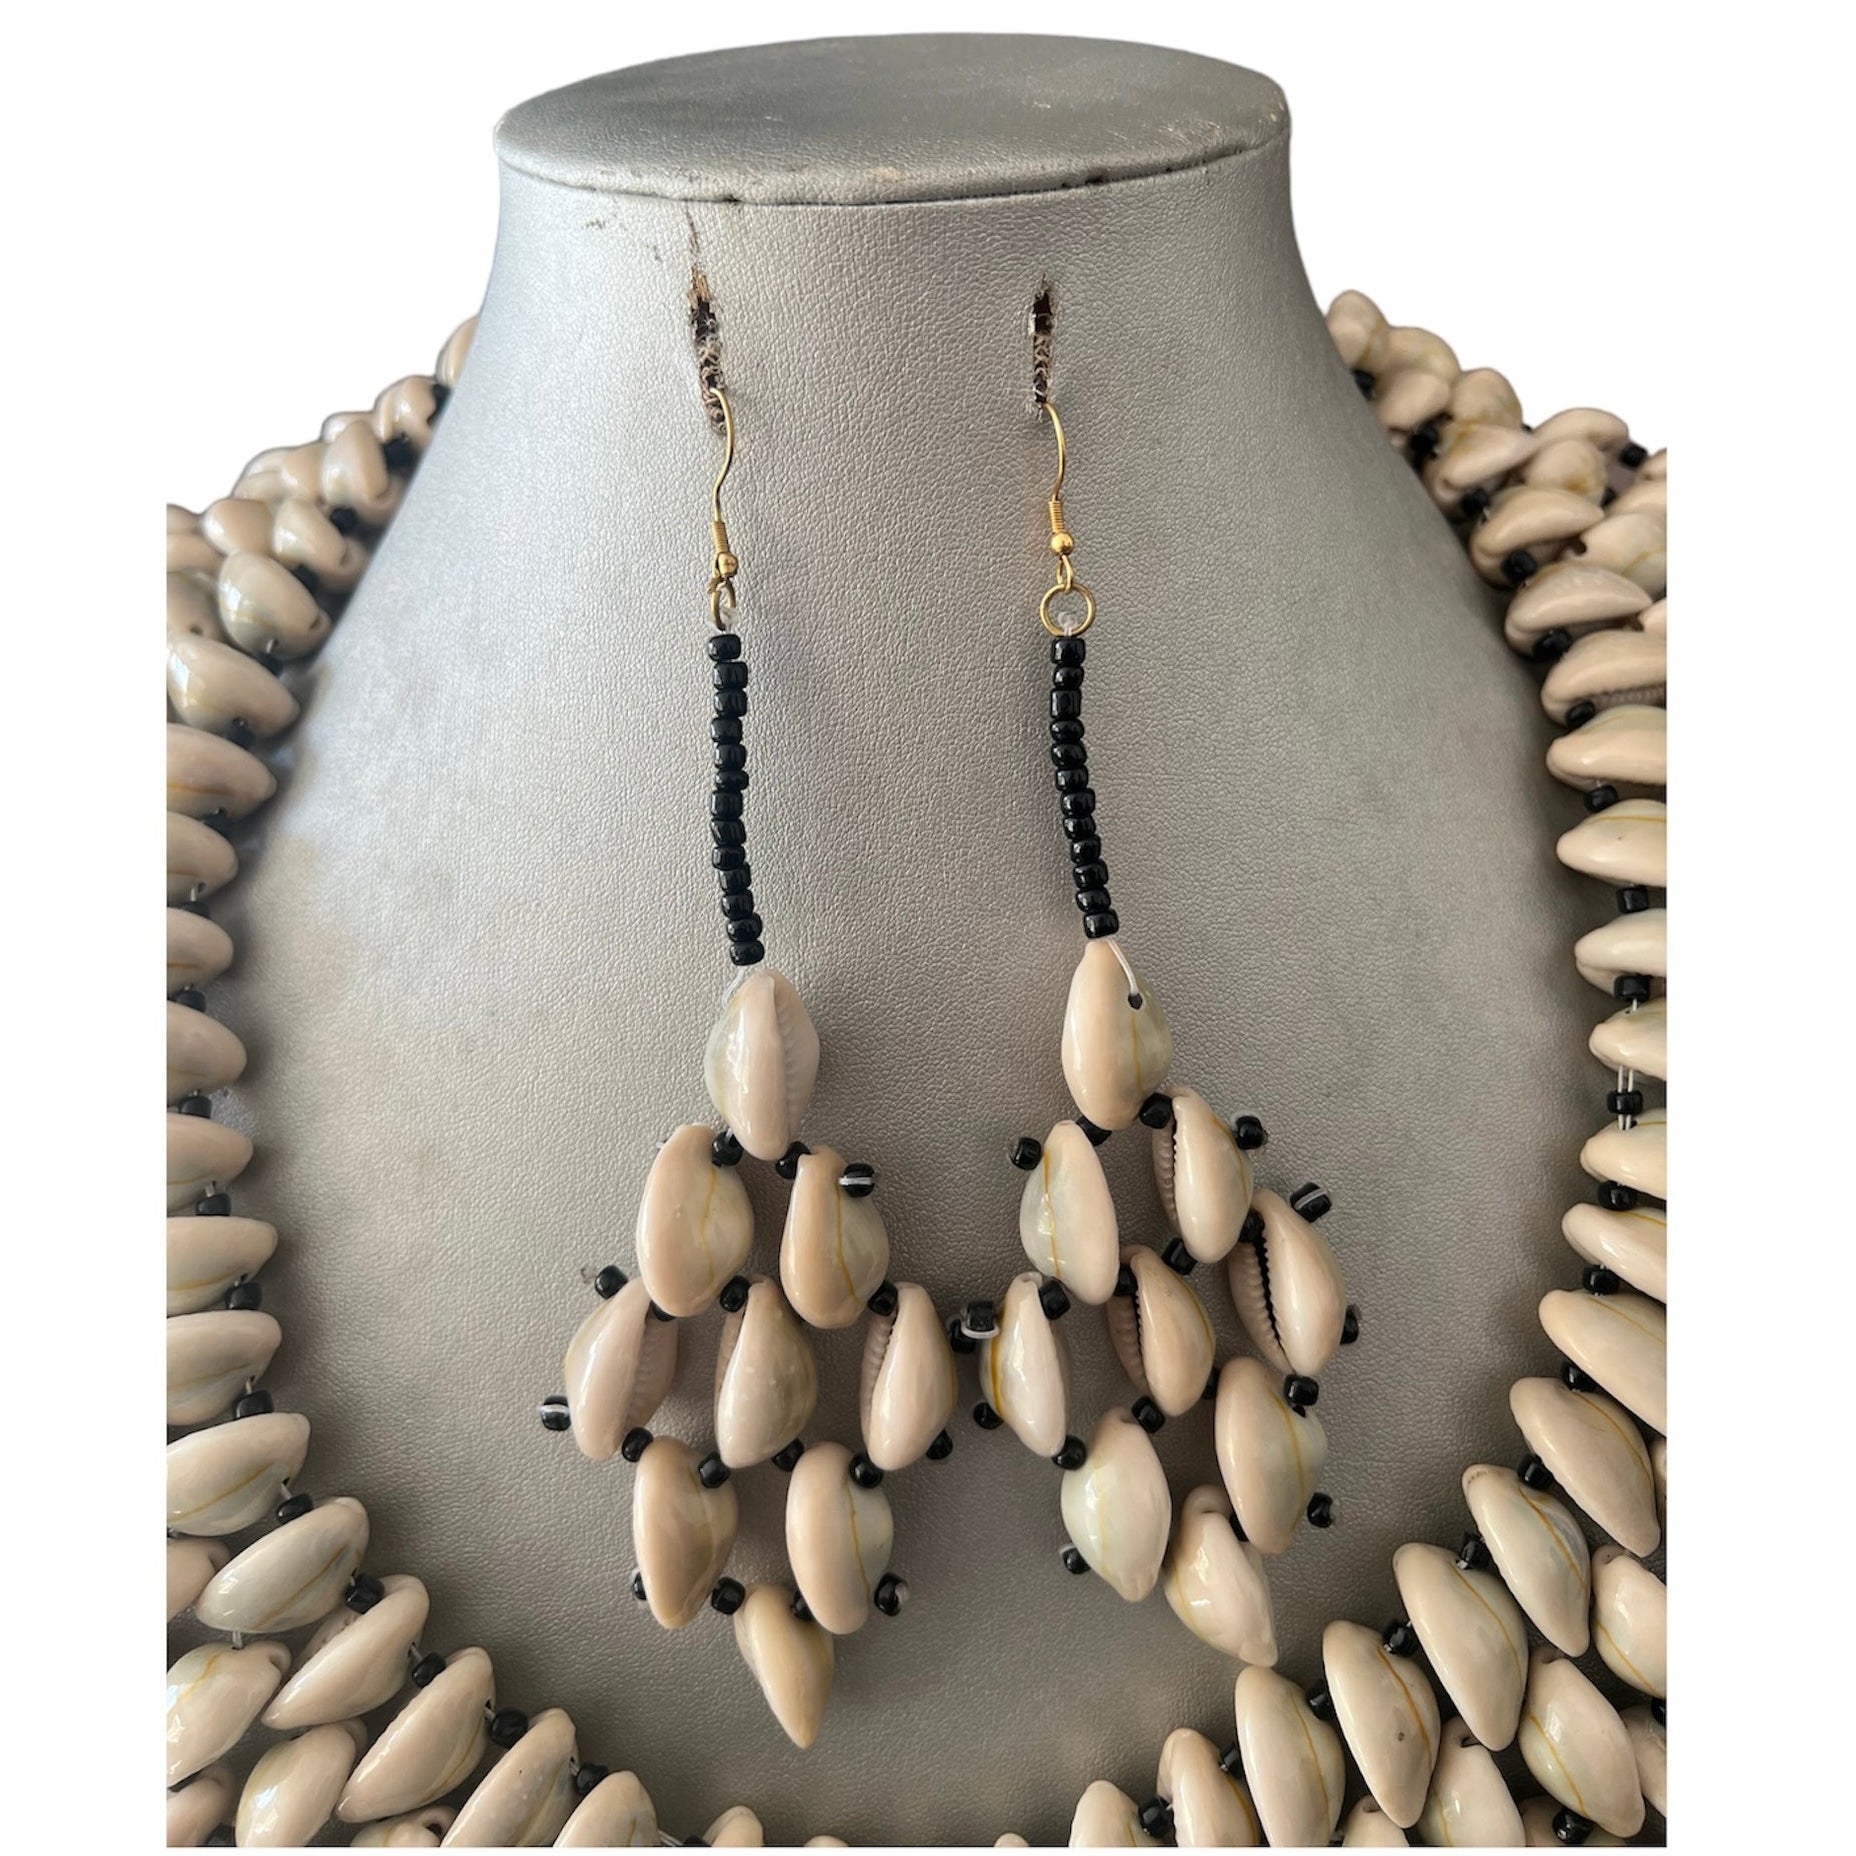 Women's Cowrie Shell Star Shaped Necklace Set -- Jewelry 54